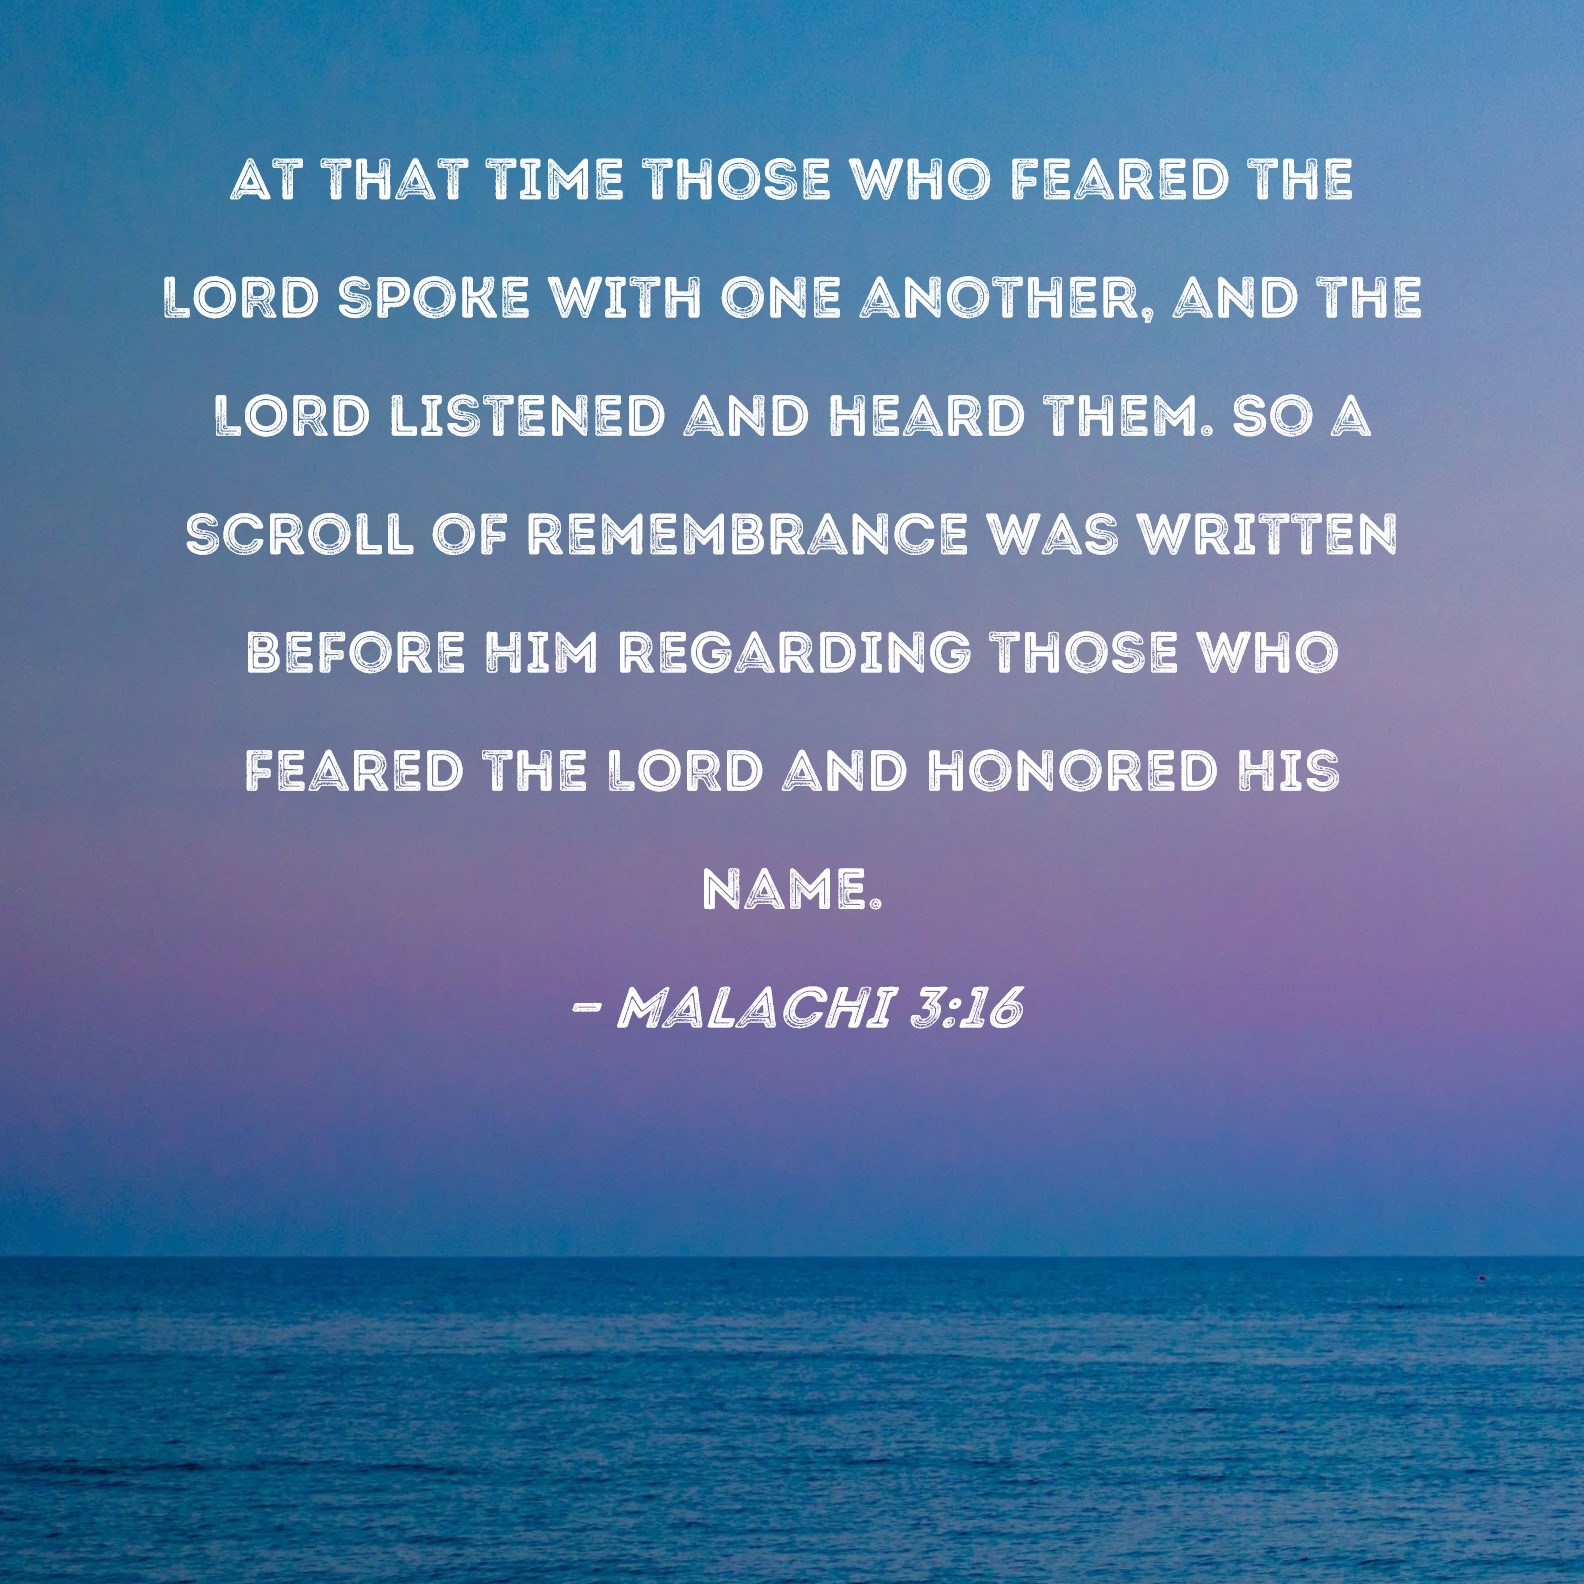 Malachi 316 At That Time Those Who Feared The Lord Spoke With One